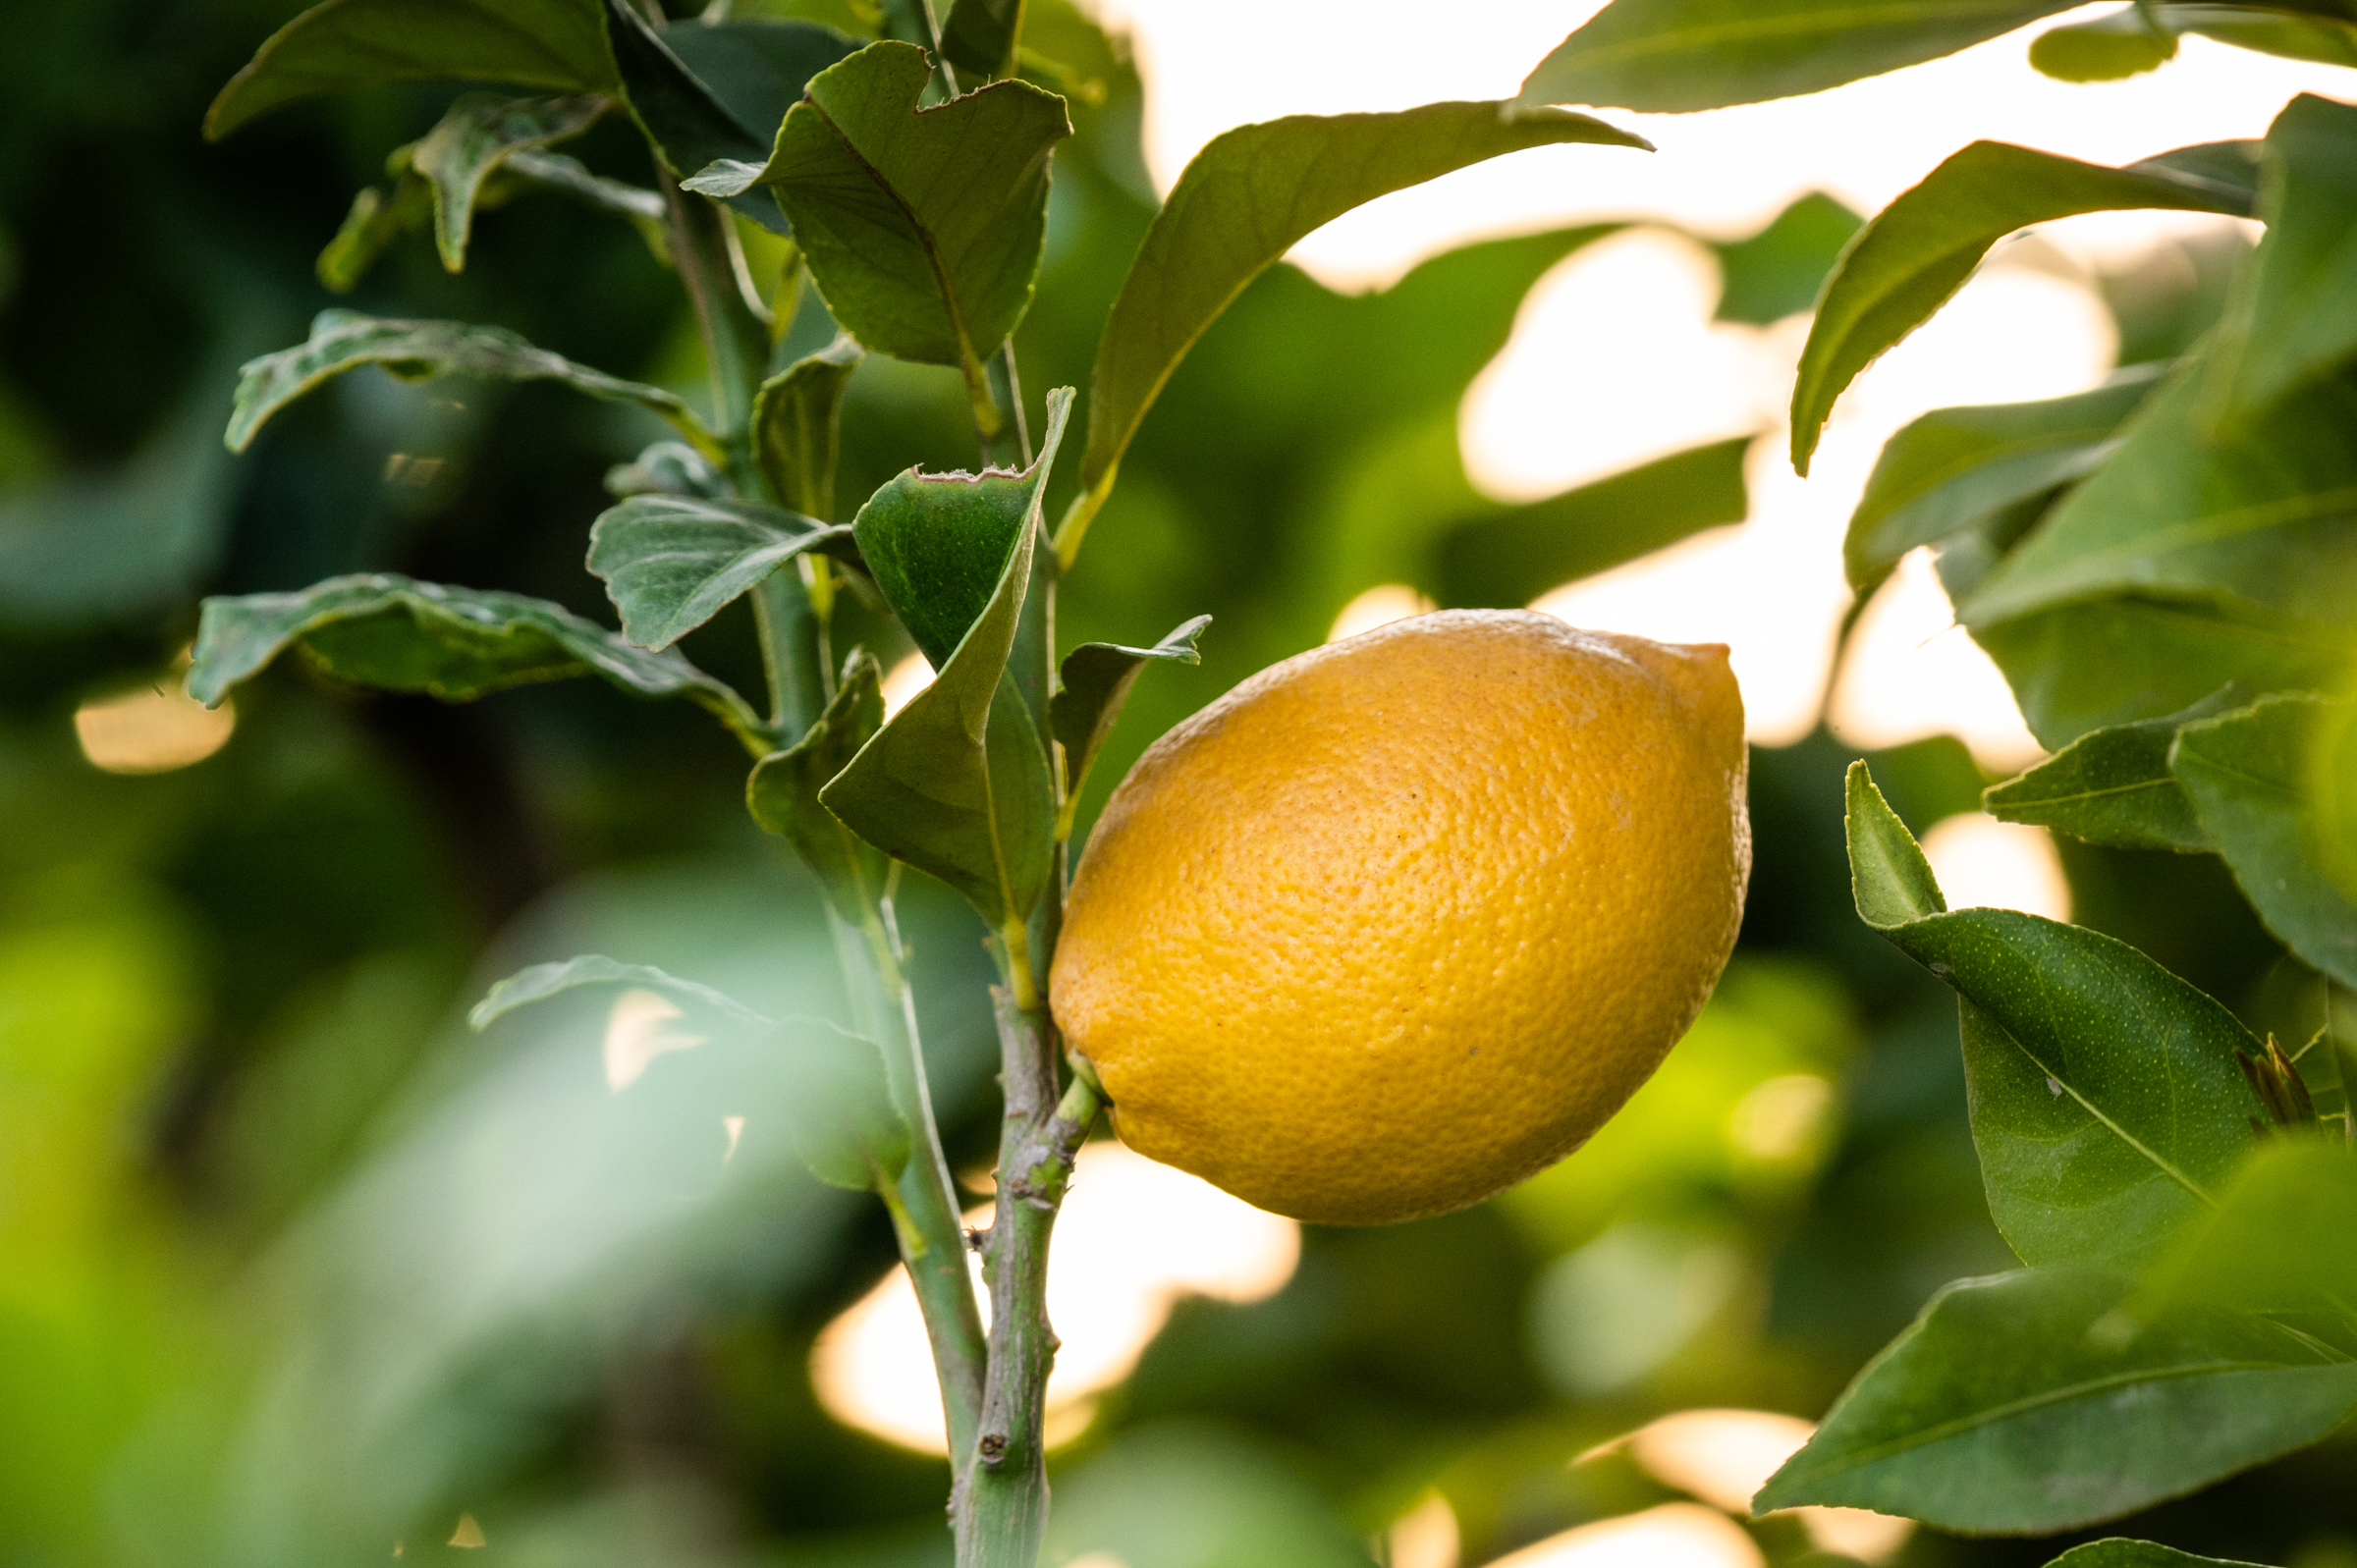 A Eureka lemon farmed by Fowler Packing in central California